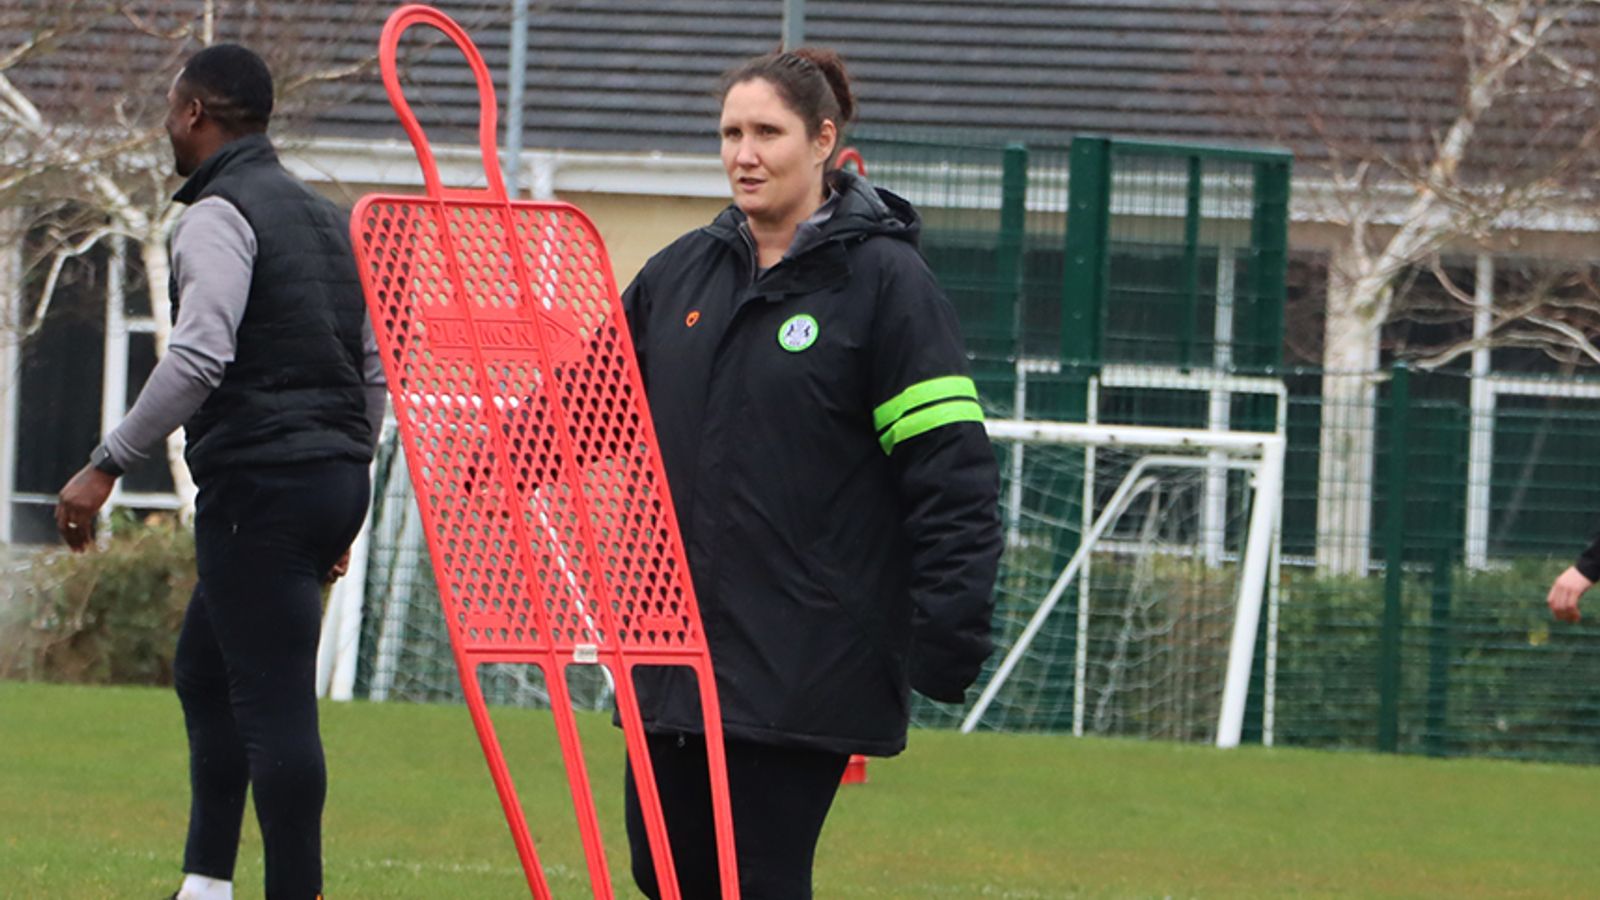 Hannah Dingley: Forest Green Rovers appoint first woman to take charge of men's professional football team